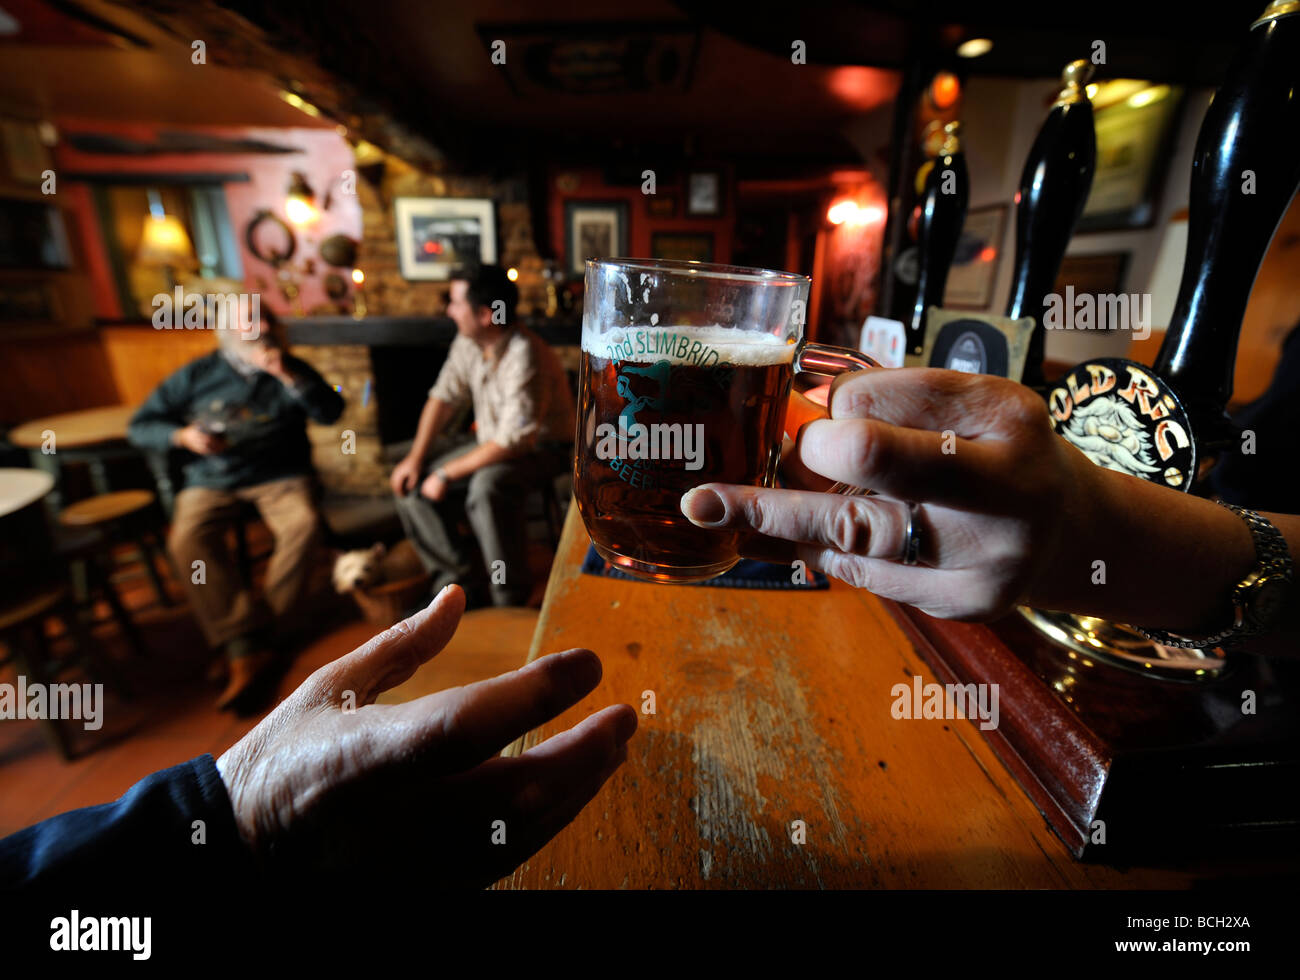 TWO MEN SIT BY AN OPEN FIRE IN A TRADITIONAL PUB AS THE LANDLADY SERVES A PINT OF ALE OVER THE BAR GLOUCESTERSHIRE ENGLAND UK Stock Photo